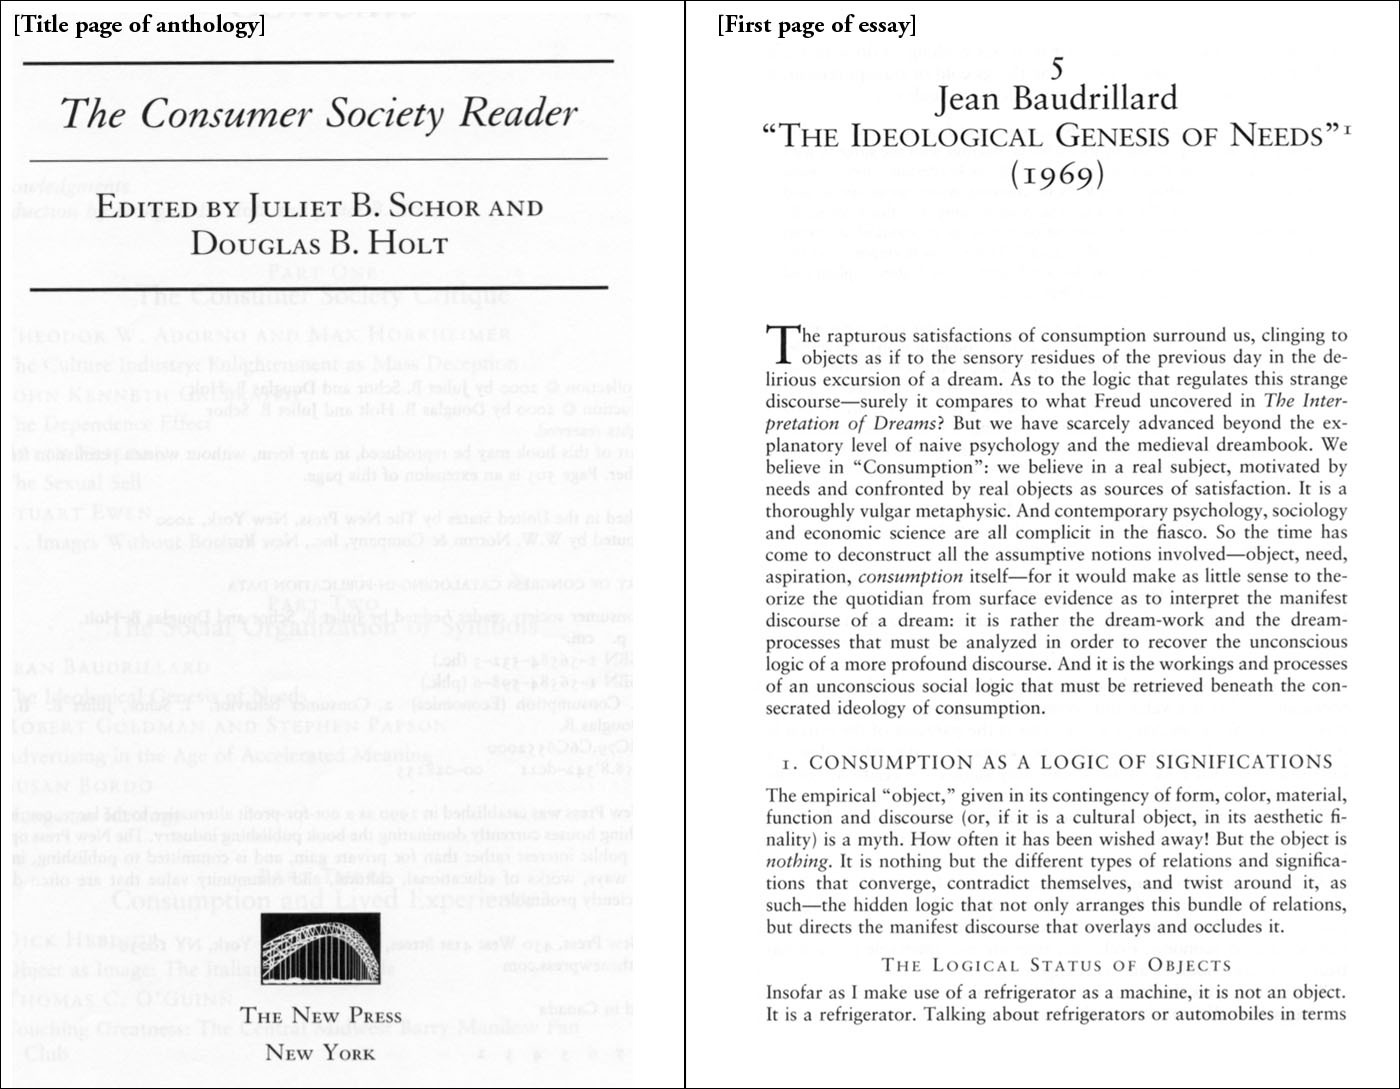 The figure shows a title page of an anthology and the first page of a selection. The title page contains the following text. The Consumer Society Reader. Edited by Juliet B. Schor and Douglas B. Holt. The New Press. New York. The first page of the essay contains the following text. Jean Baudrillard, The Ideological Genesis of Needs (1969). Then the text of the essay is shown.